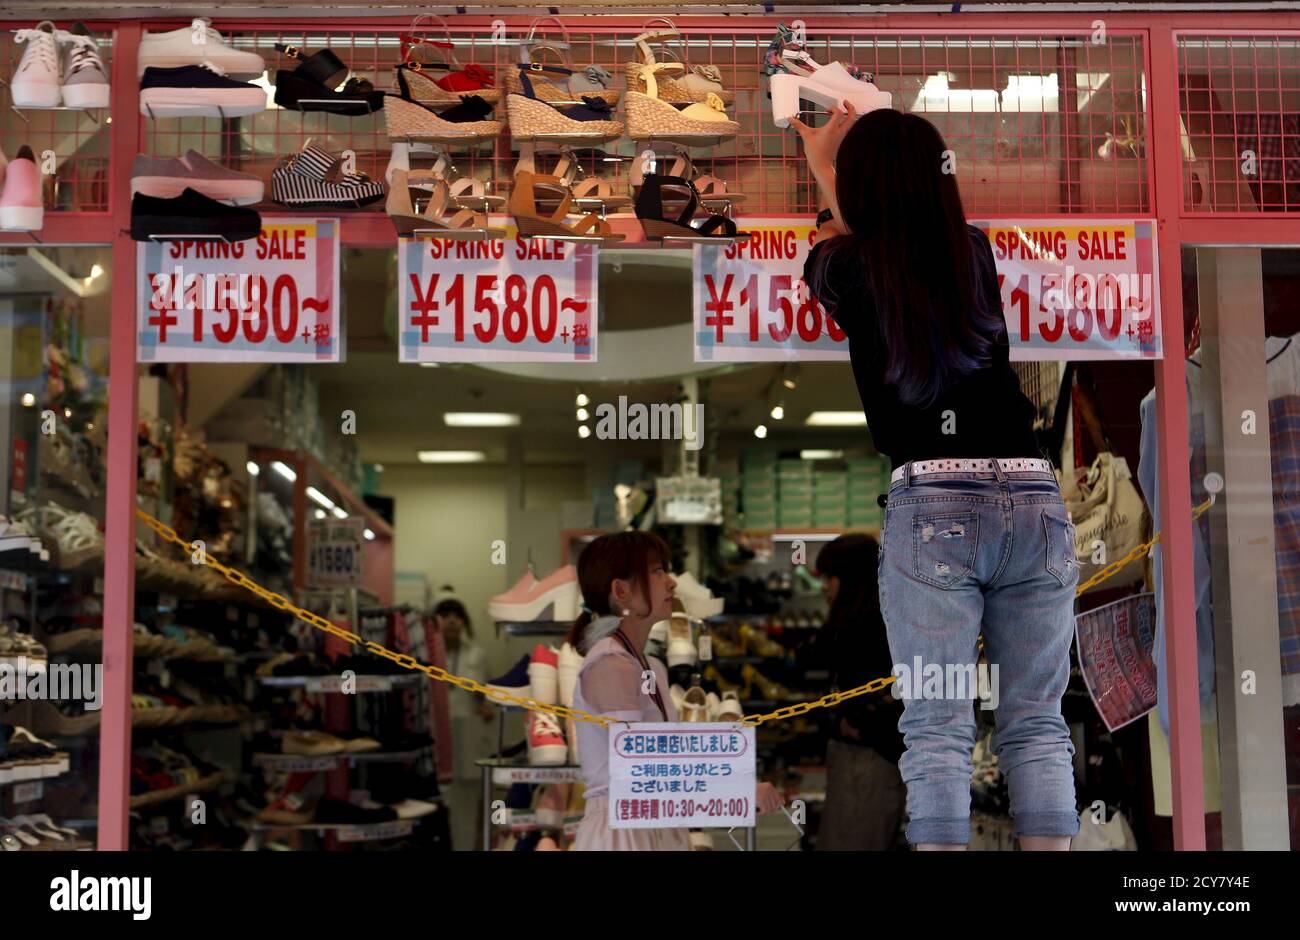 A shops clerk displays a shoe atop price tags as she prepares to open a  shoes store at Tokyo's Harajuku shopping district, Japan, April 30, 2015.  The Bank of Japan maintained its